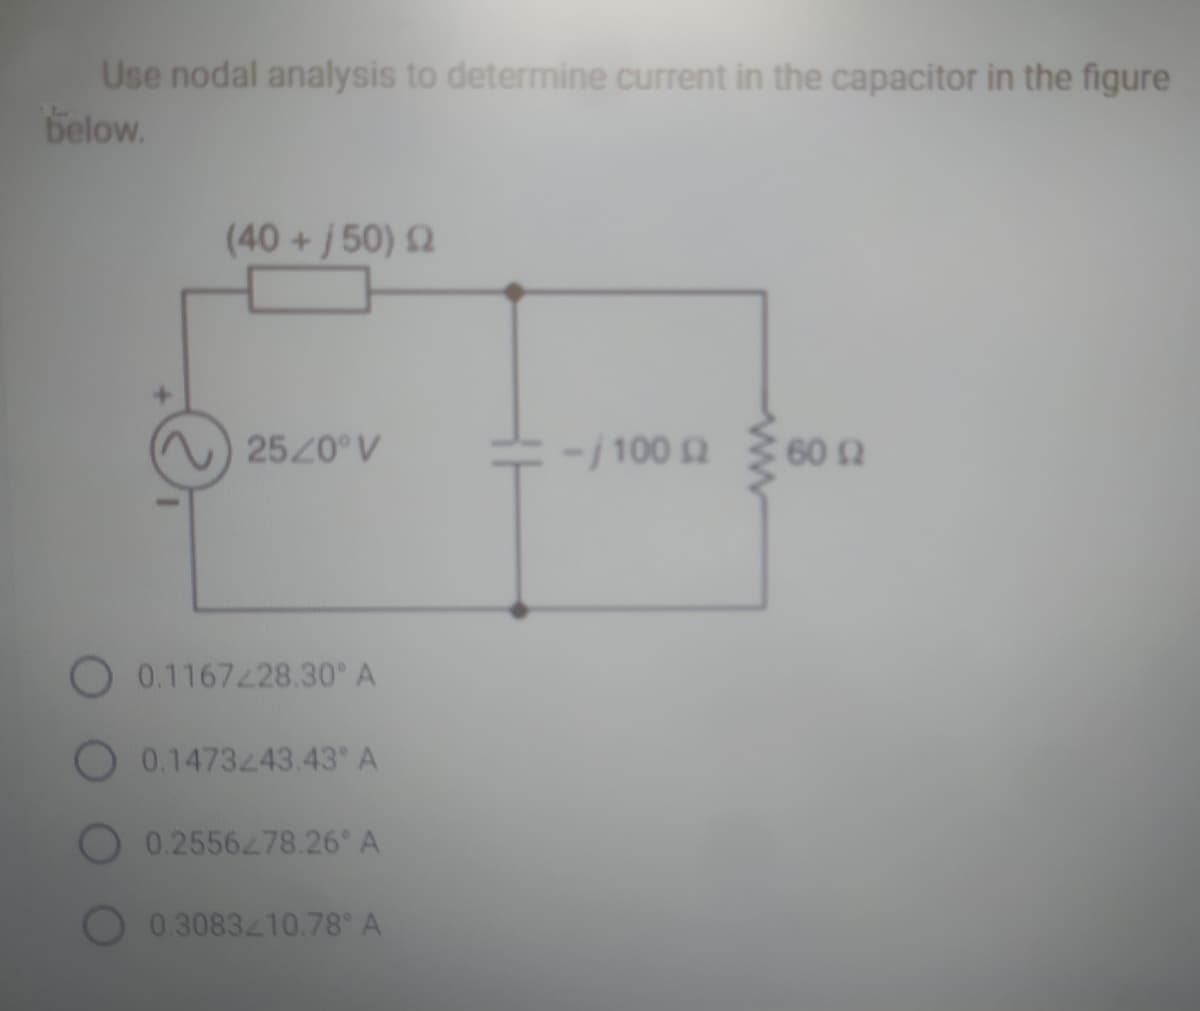 Use nodal analysis to determine current in the capacitor in the figure
below.
(40+/50) 02
25/0° V
0.1167228.30 A
O 0.1473243.43° A
0.2556278.26° A
0.3083210.78° A
-/100 £2
60 (2